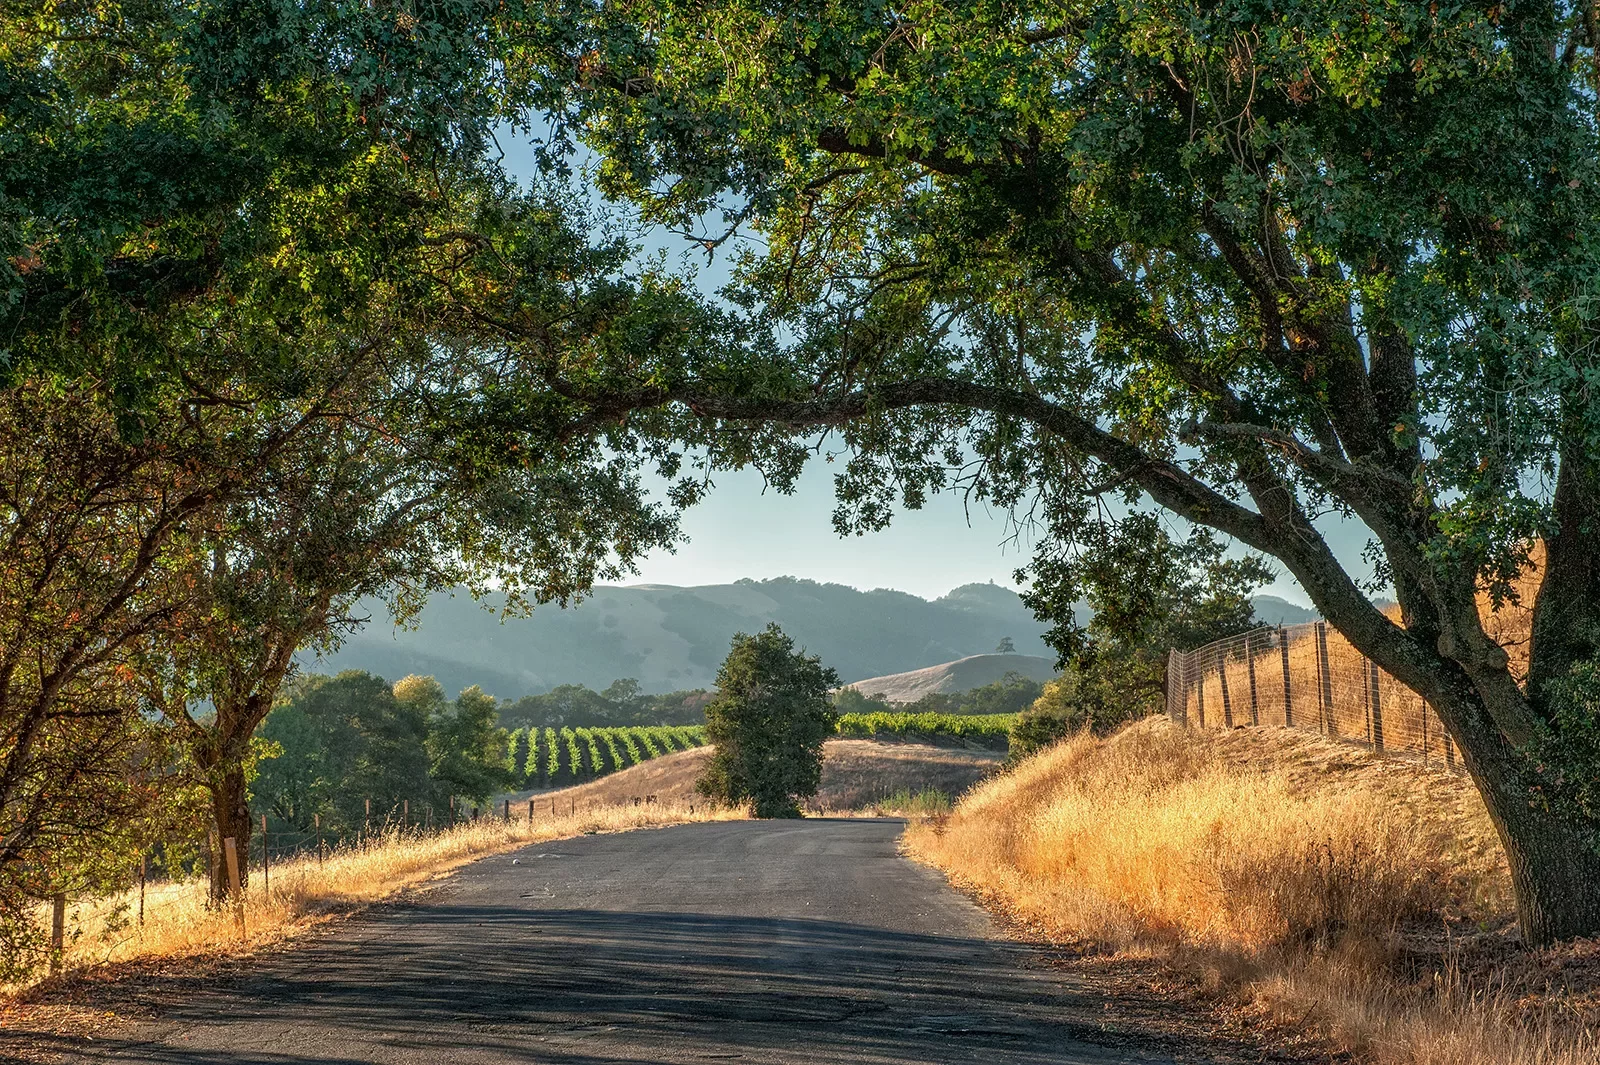 Wine-country road with low hanging trees and vineyards.